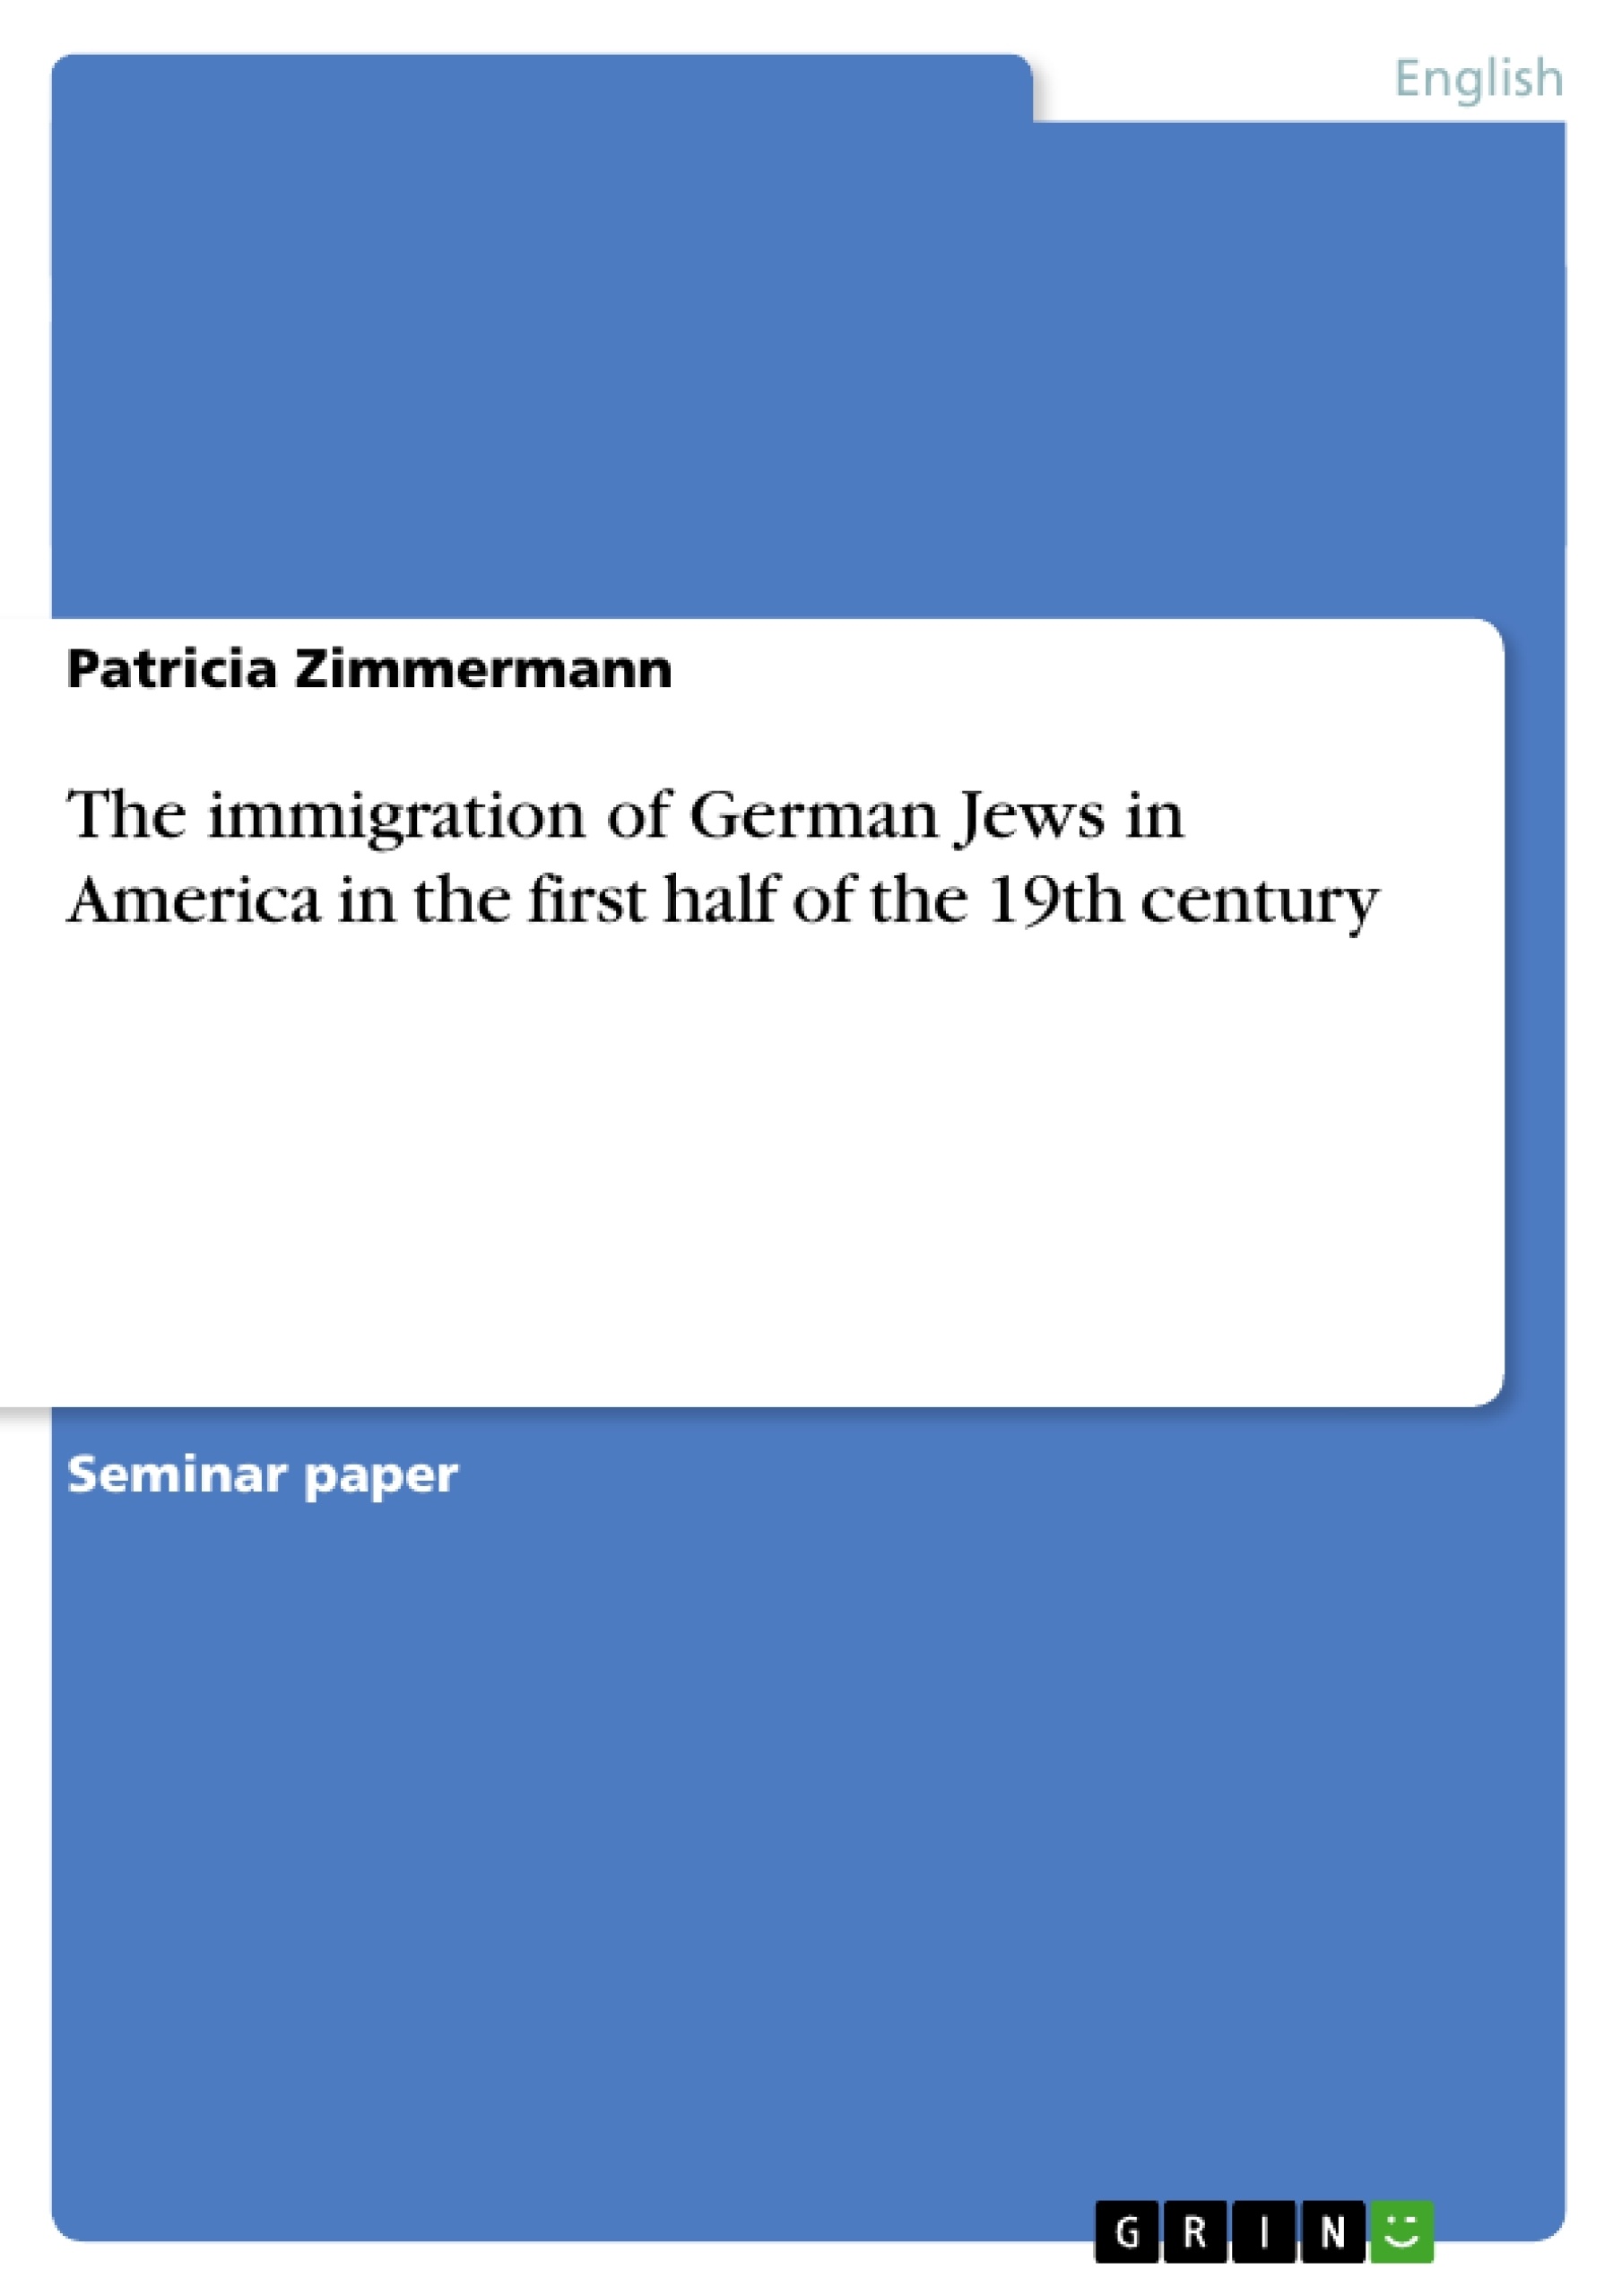 Título: The immigration of German Jews in America in the first half of the 19th century